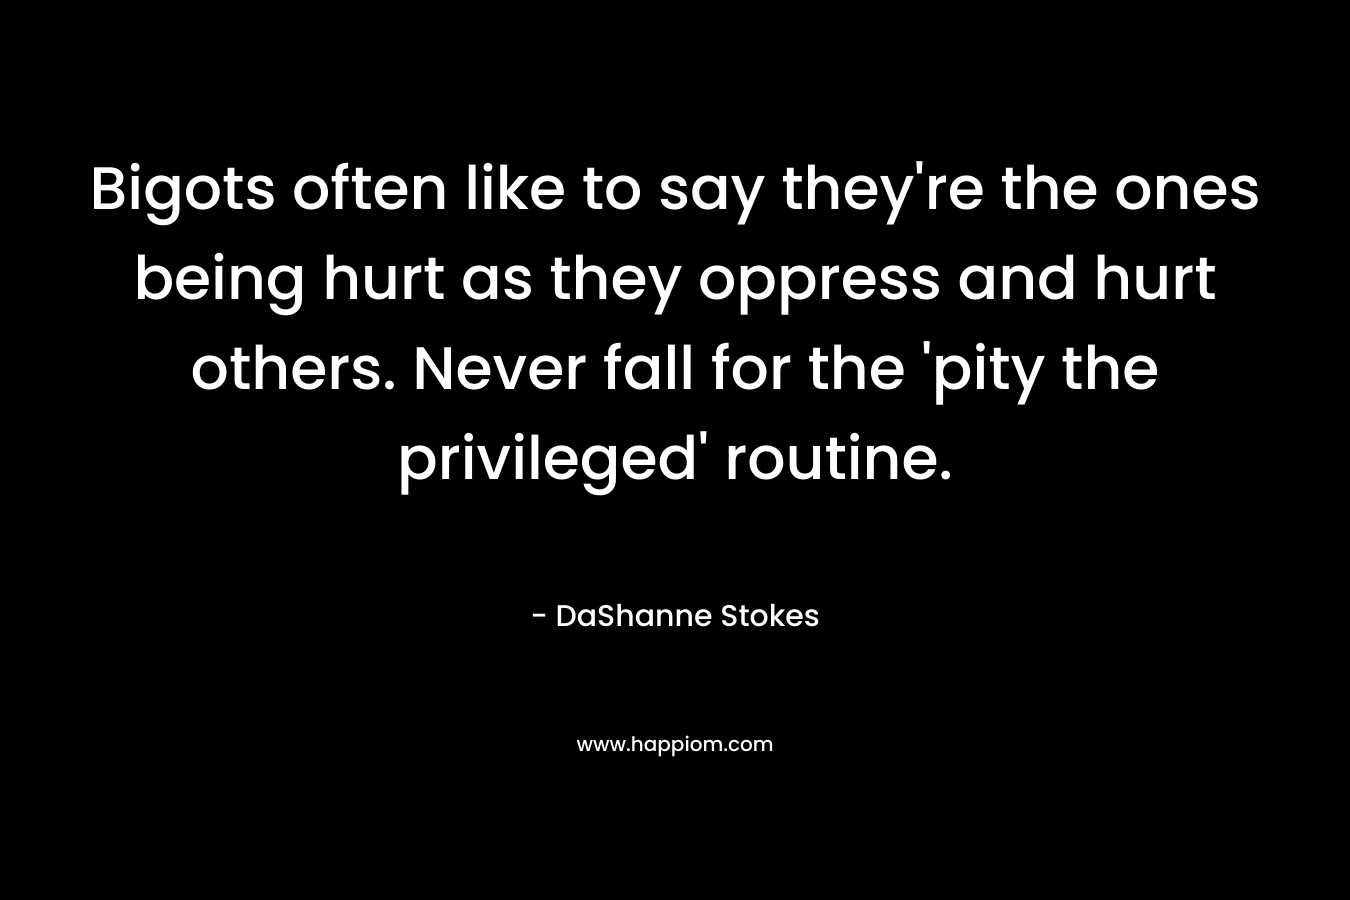 Bigots often like to say they're the ones being hurt as they oppress and hurt others. Never fall for the 'pity the privileged' routine.